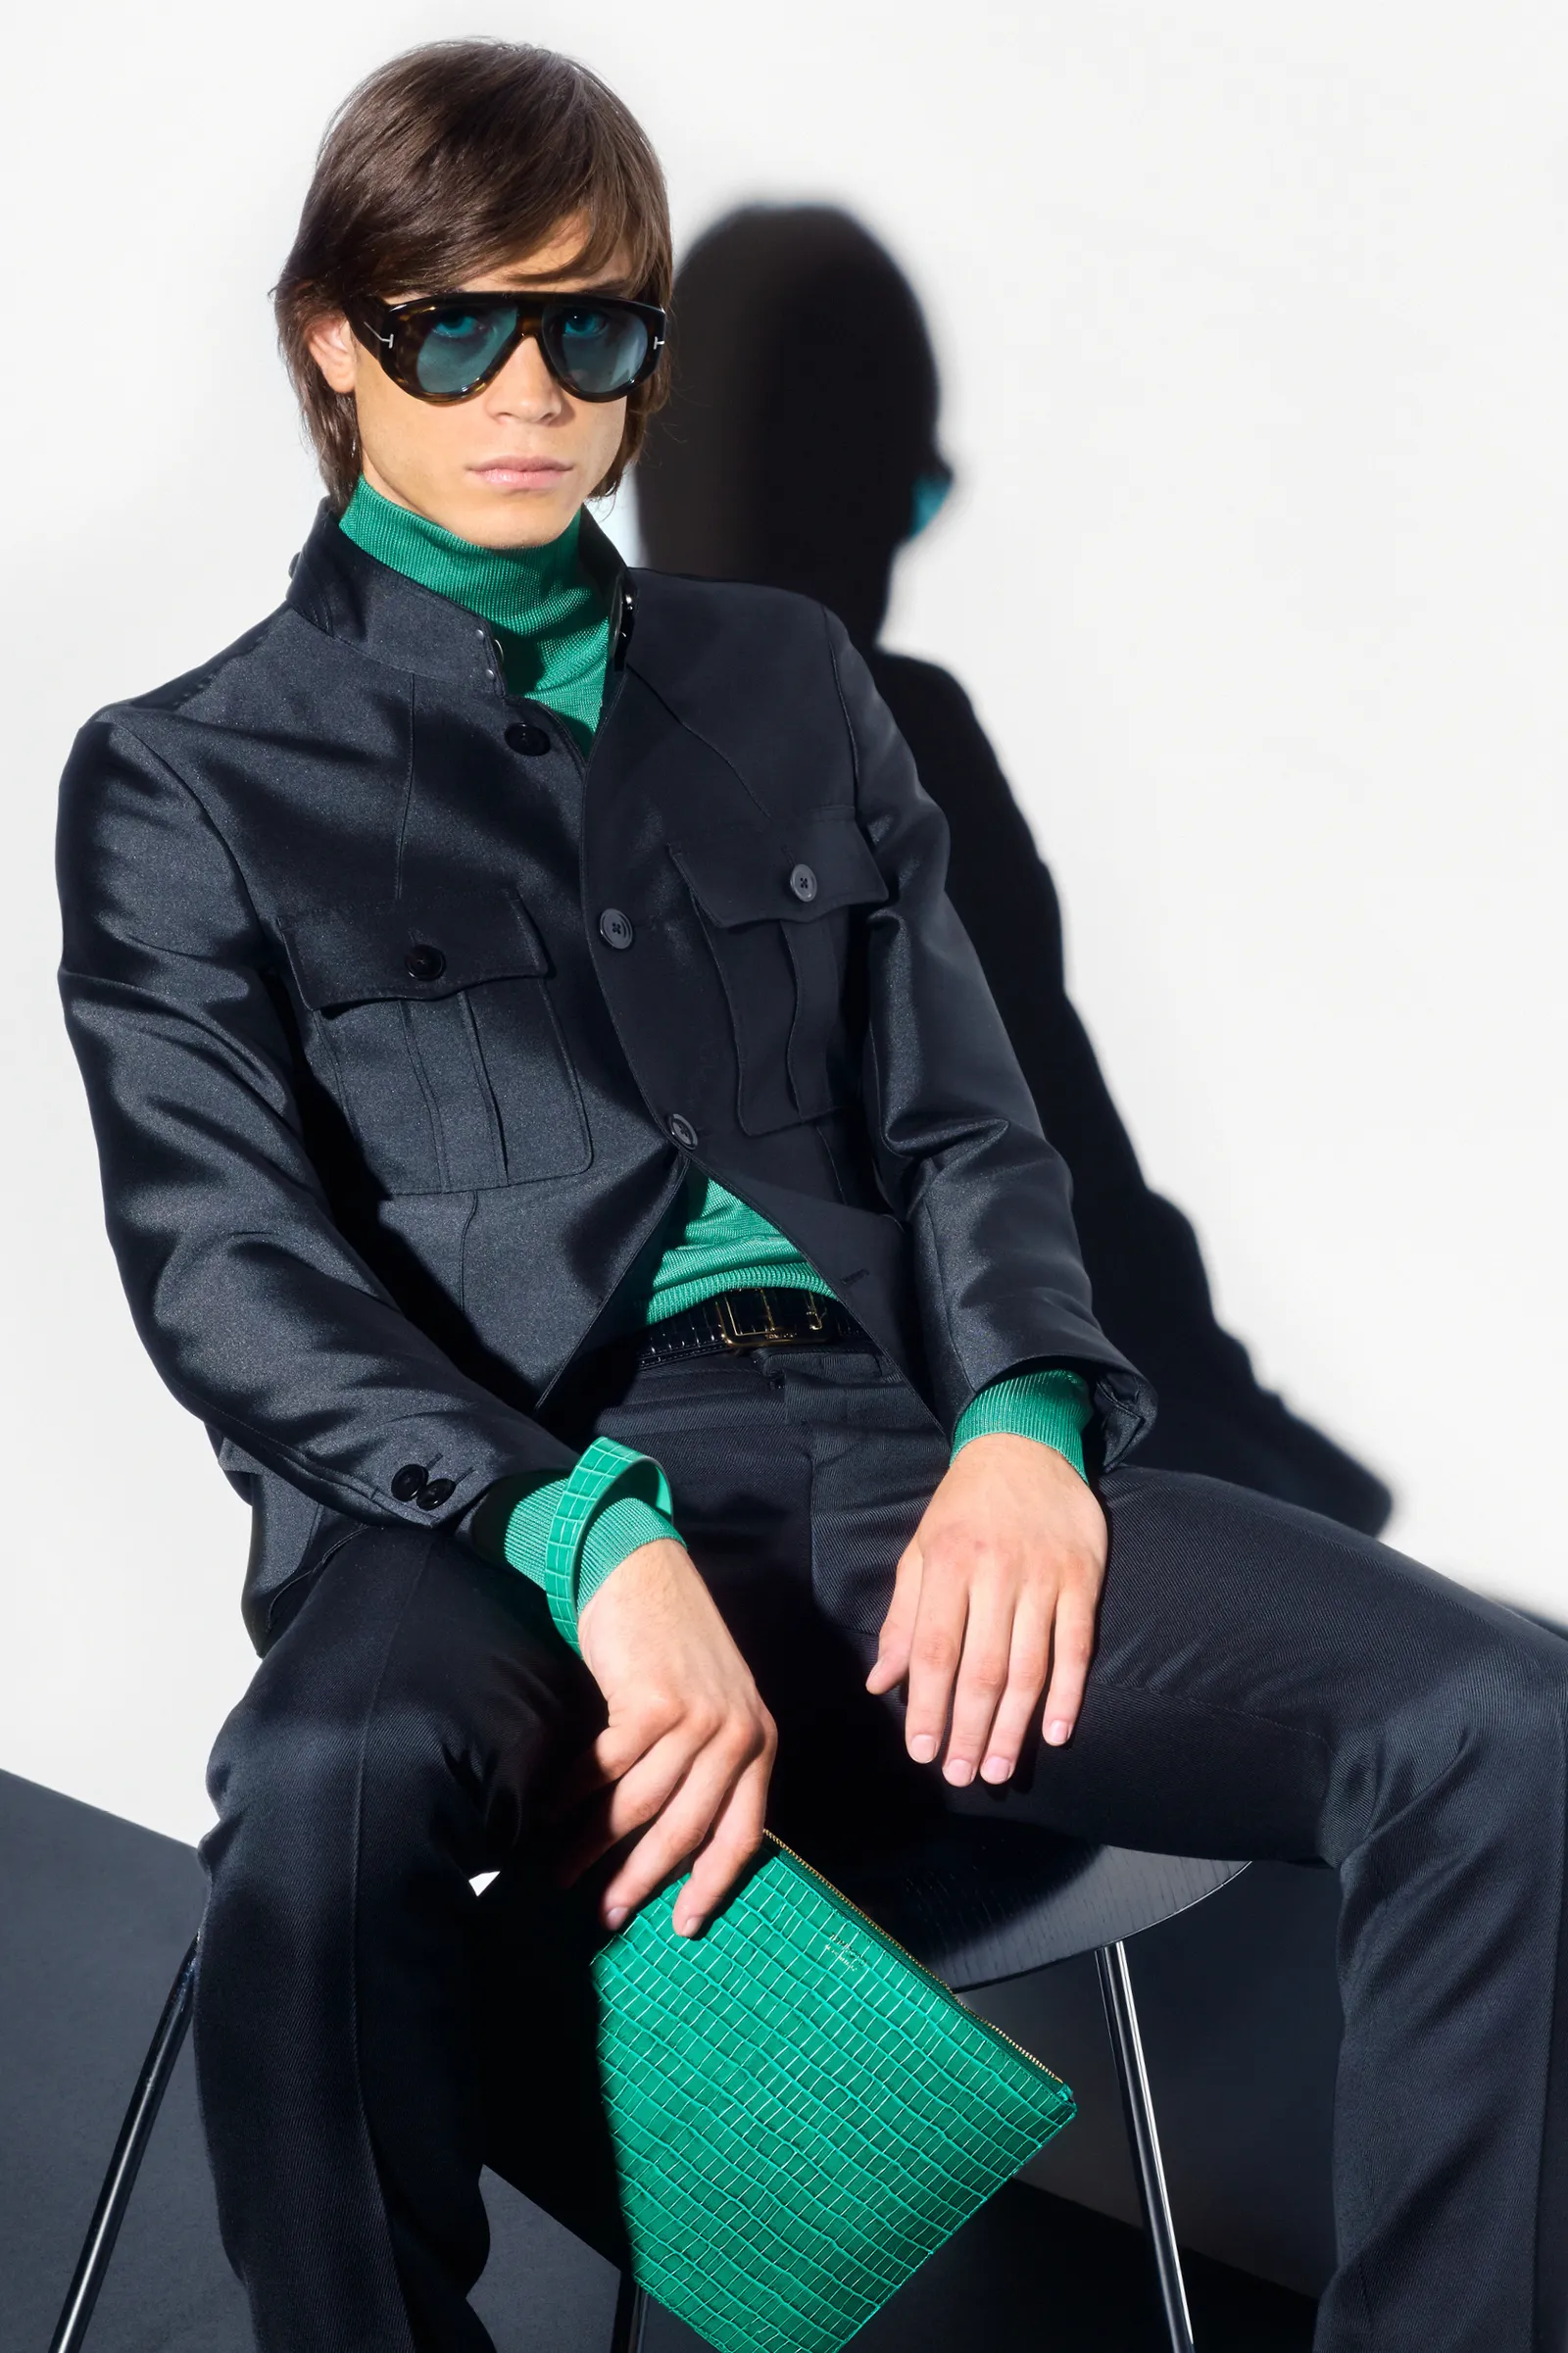 00024-tom-ford-fall-22-mens-nyc-credit-brand.png